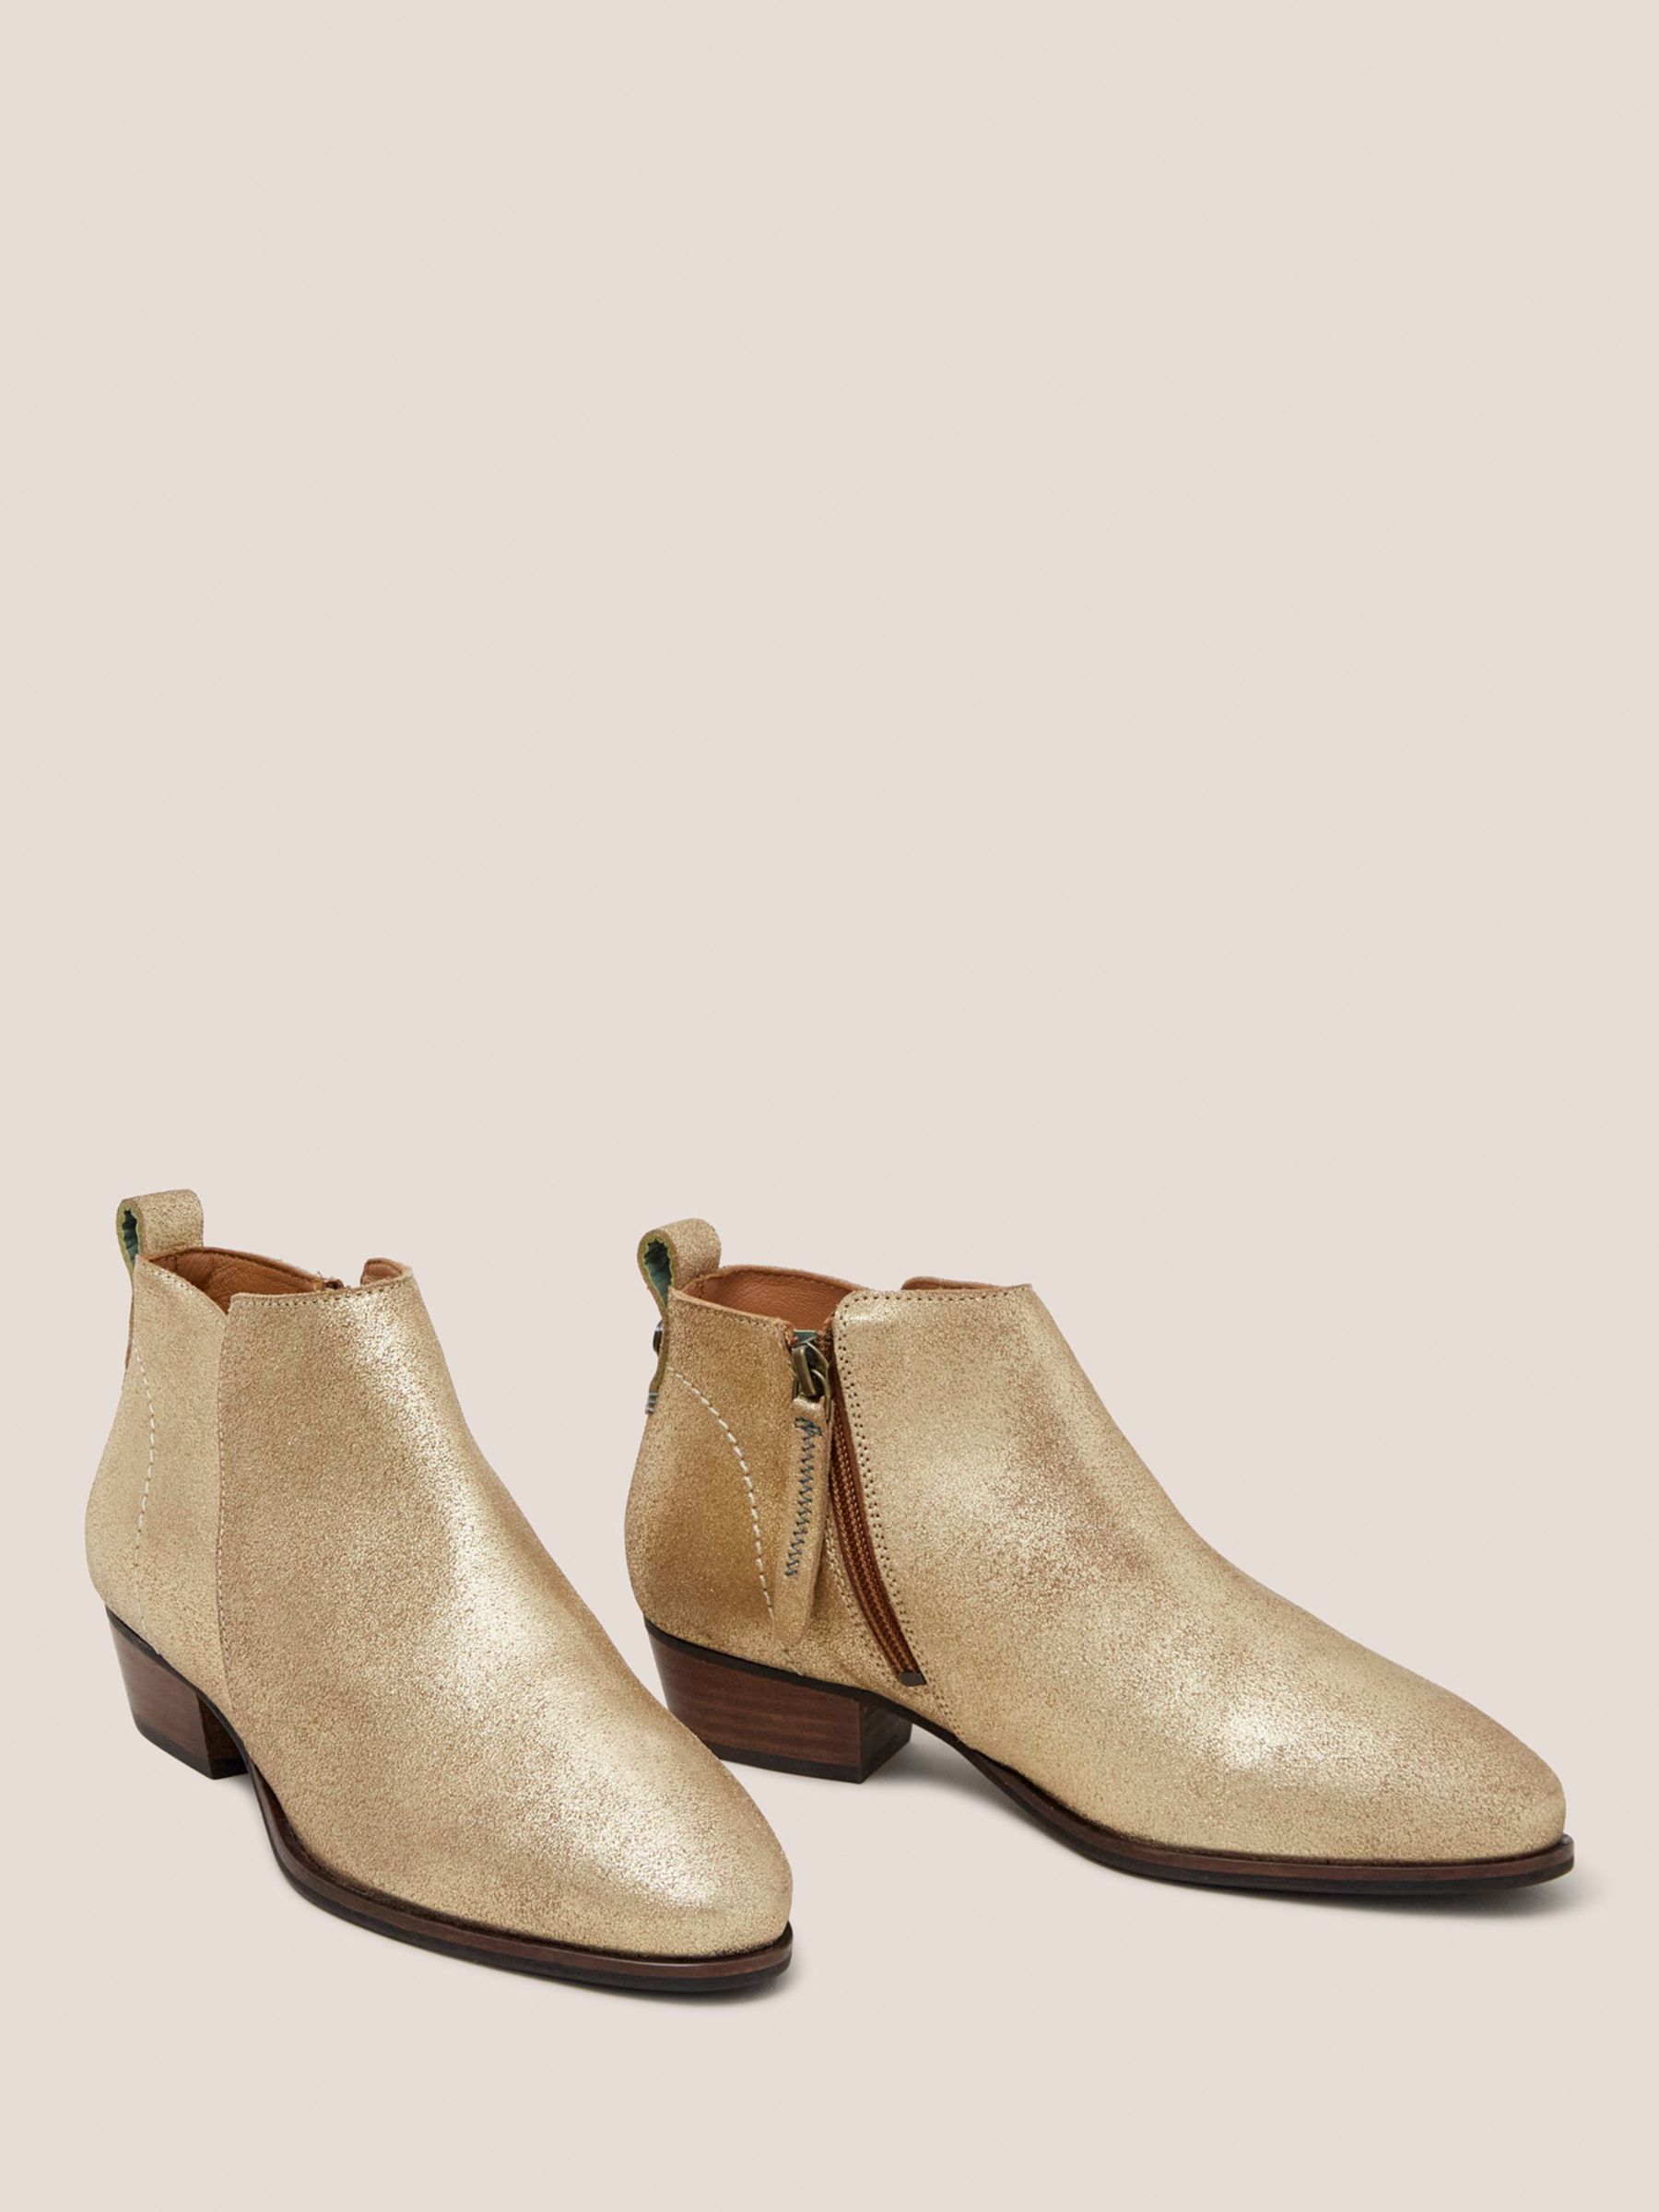 White Stuff Willow Leather Shoe Boots, Gold, 8